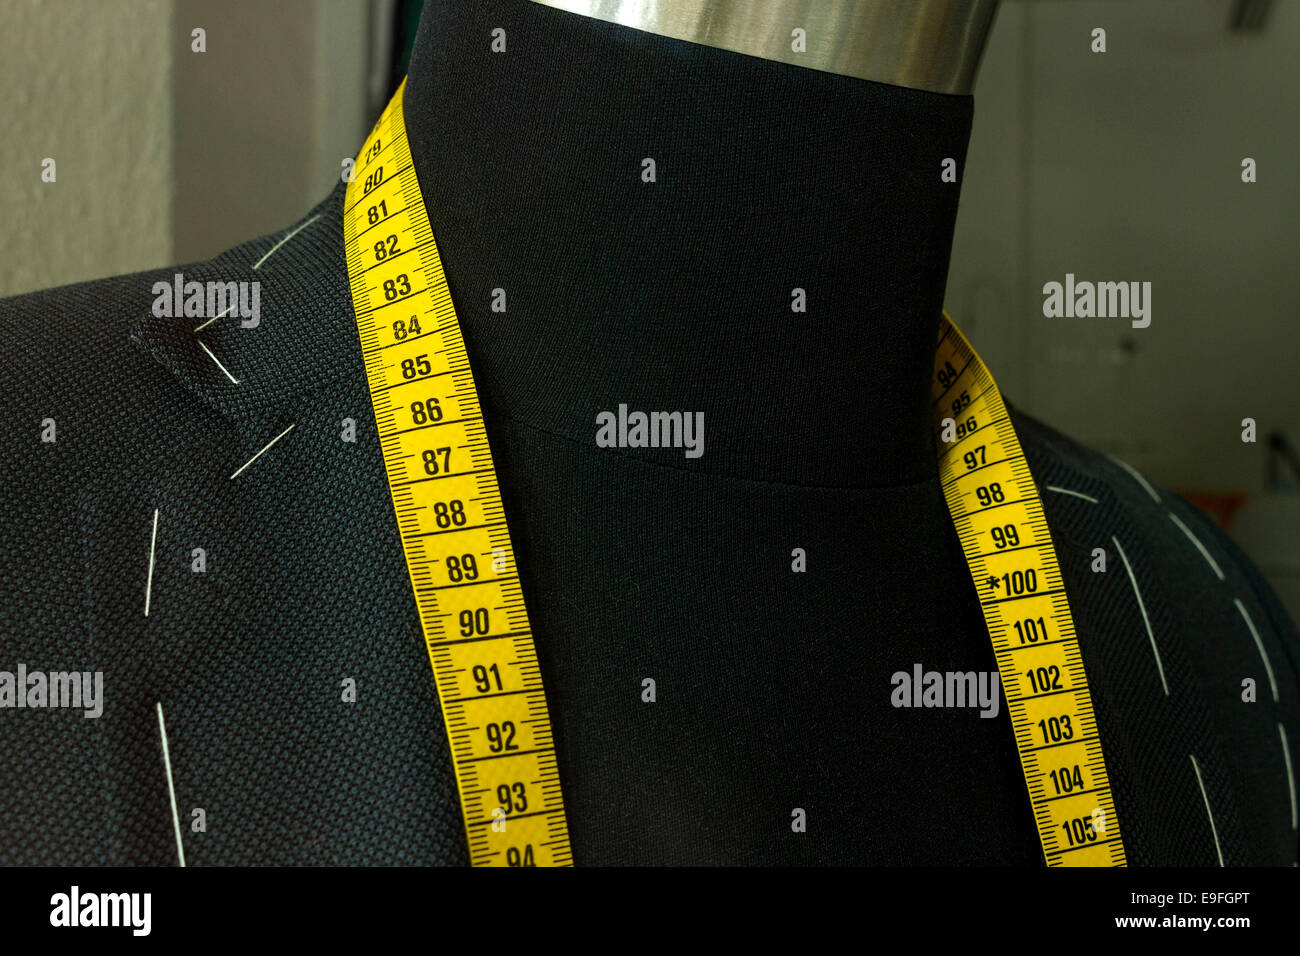 https://c8.alamy.com/comp/E9FGPT/tailors-tape-around-the-neck-of-a-tailors-dummy-mannequin-E9FGPT.jpg